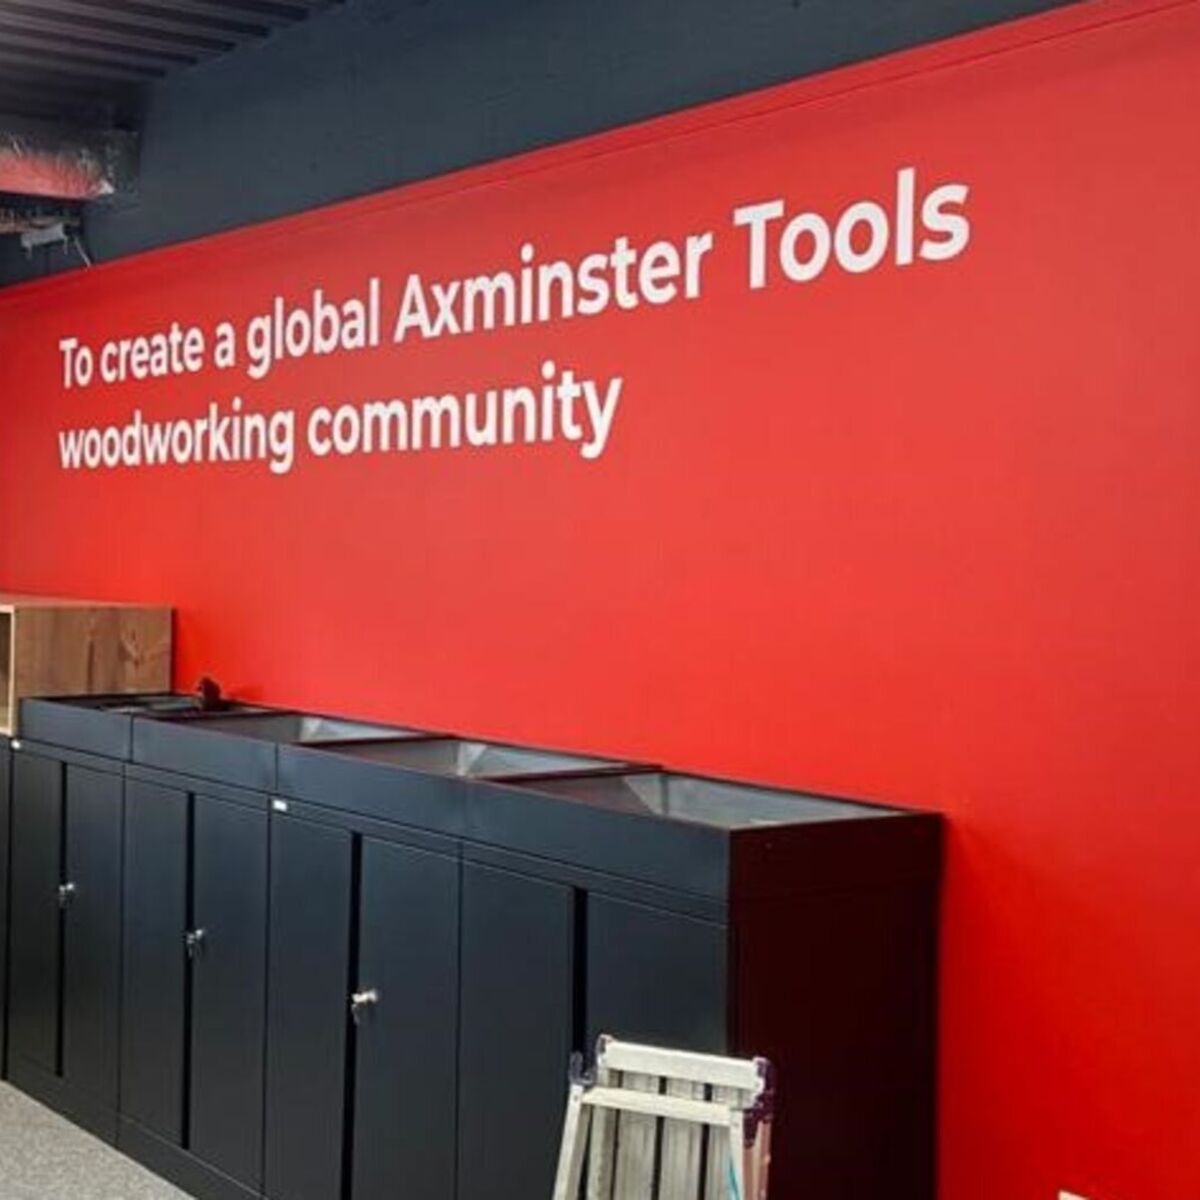 White Cut Vinyl Wall Graphics Showing Mission Statement for Axminster Tools.jpg